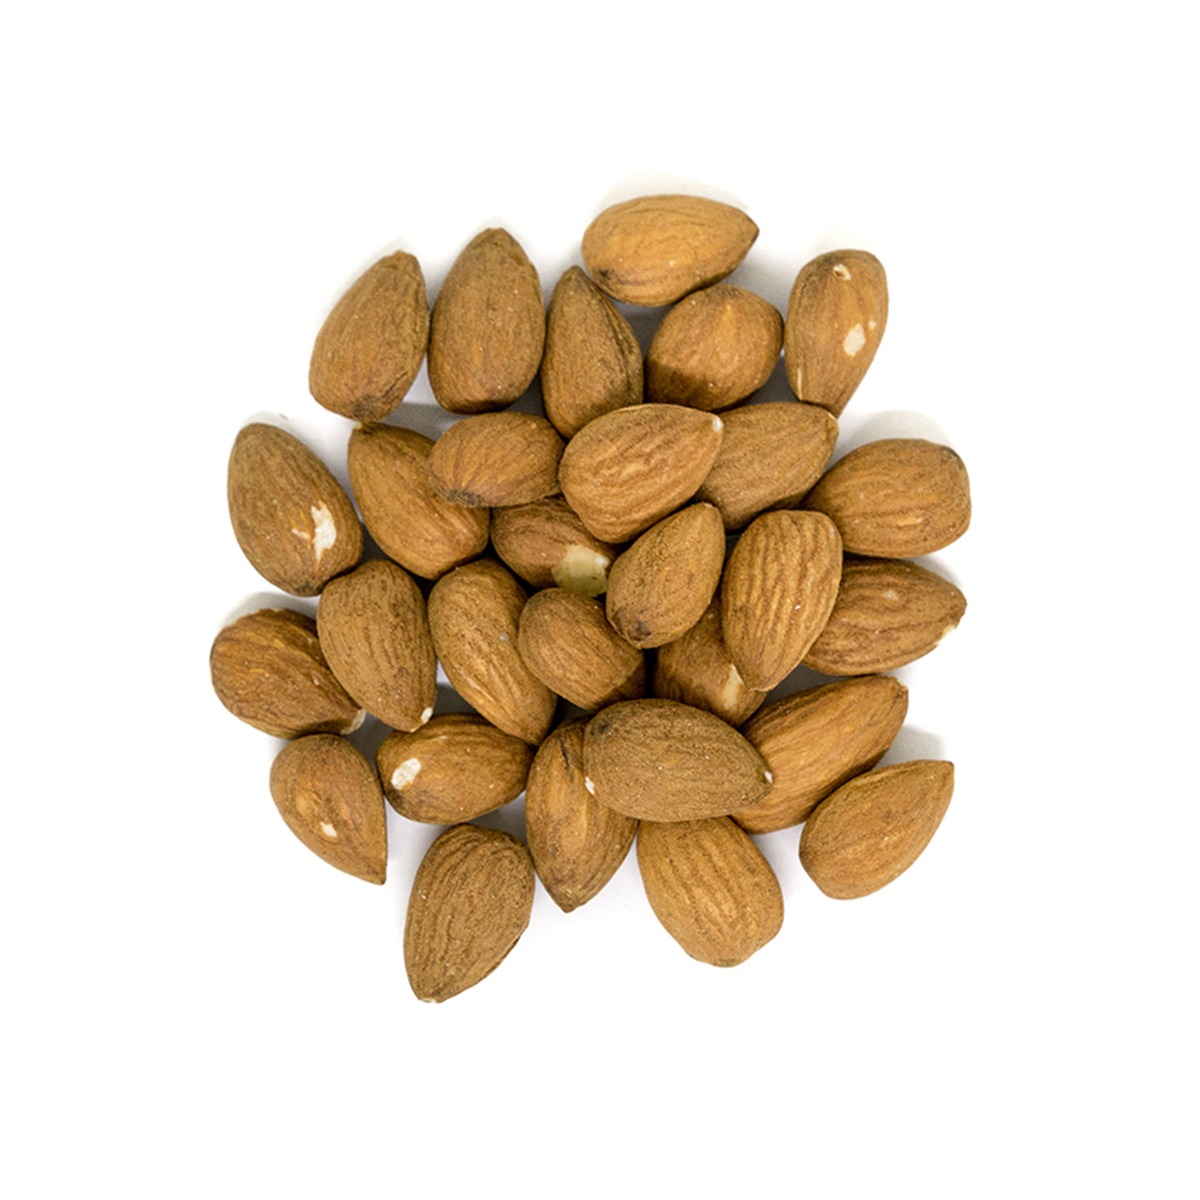 Real • Organic Unblanched Almonds （In-store pick up, limited quantity, $4.99）-929